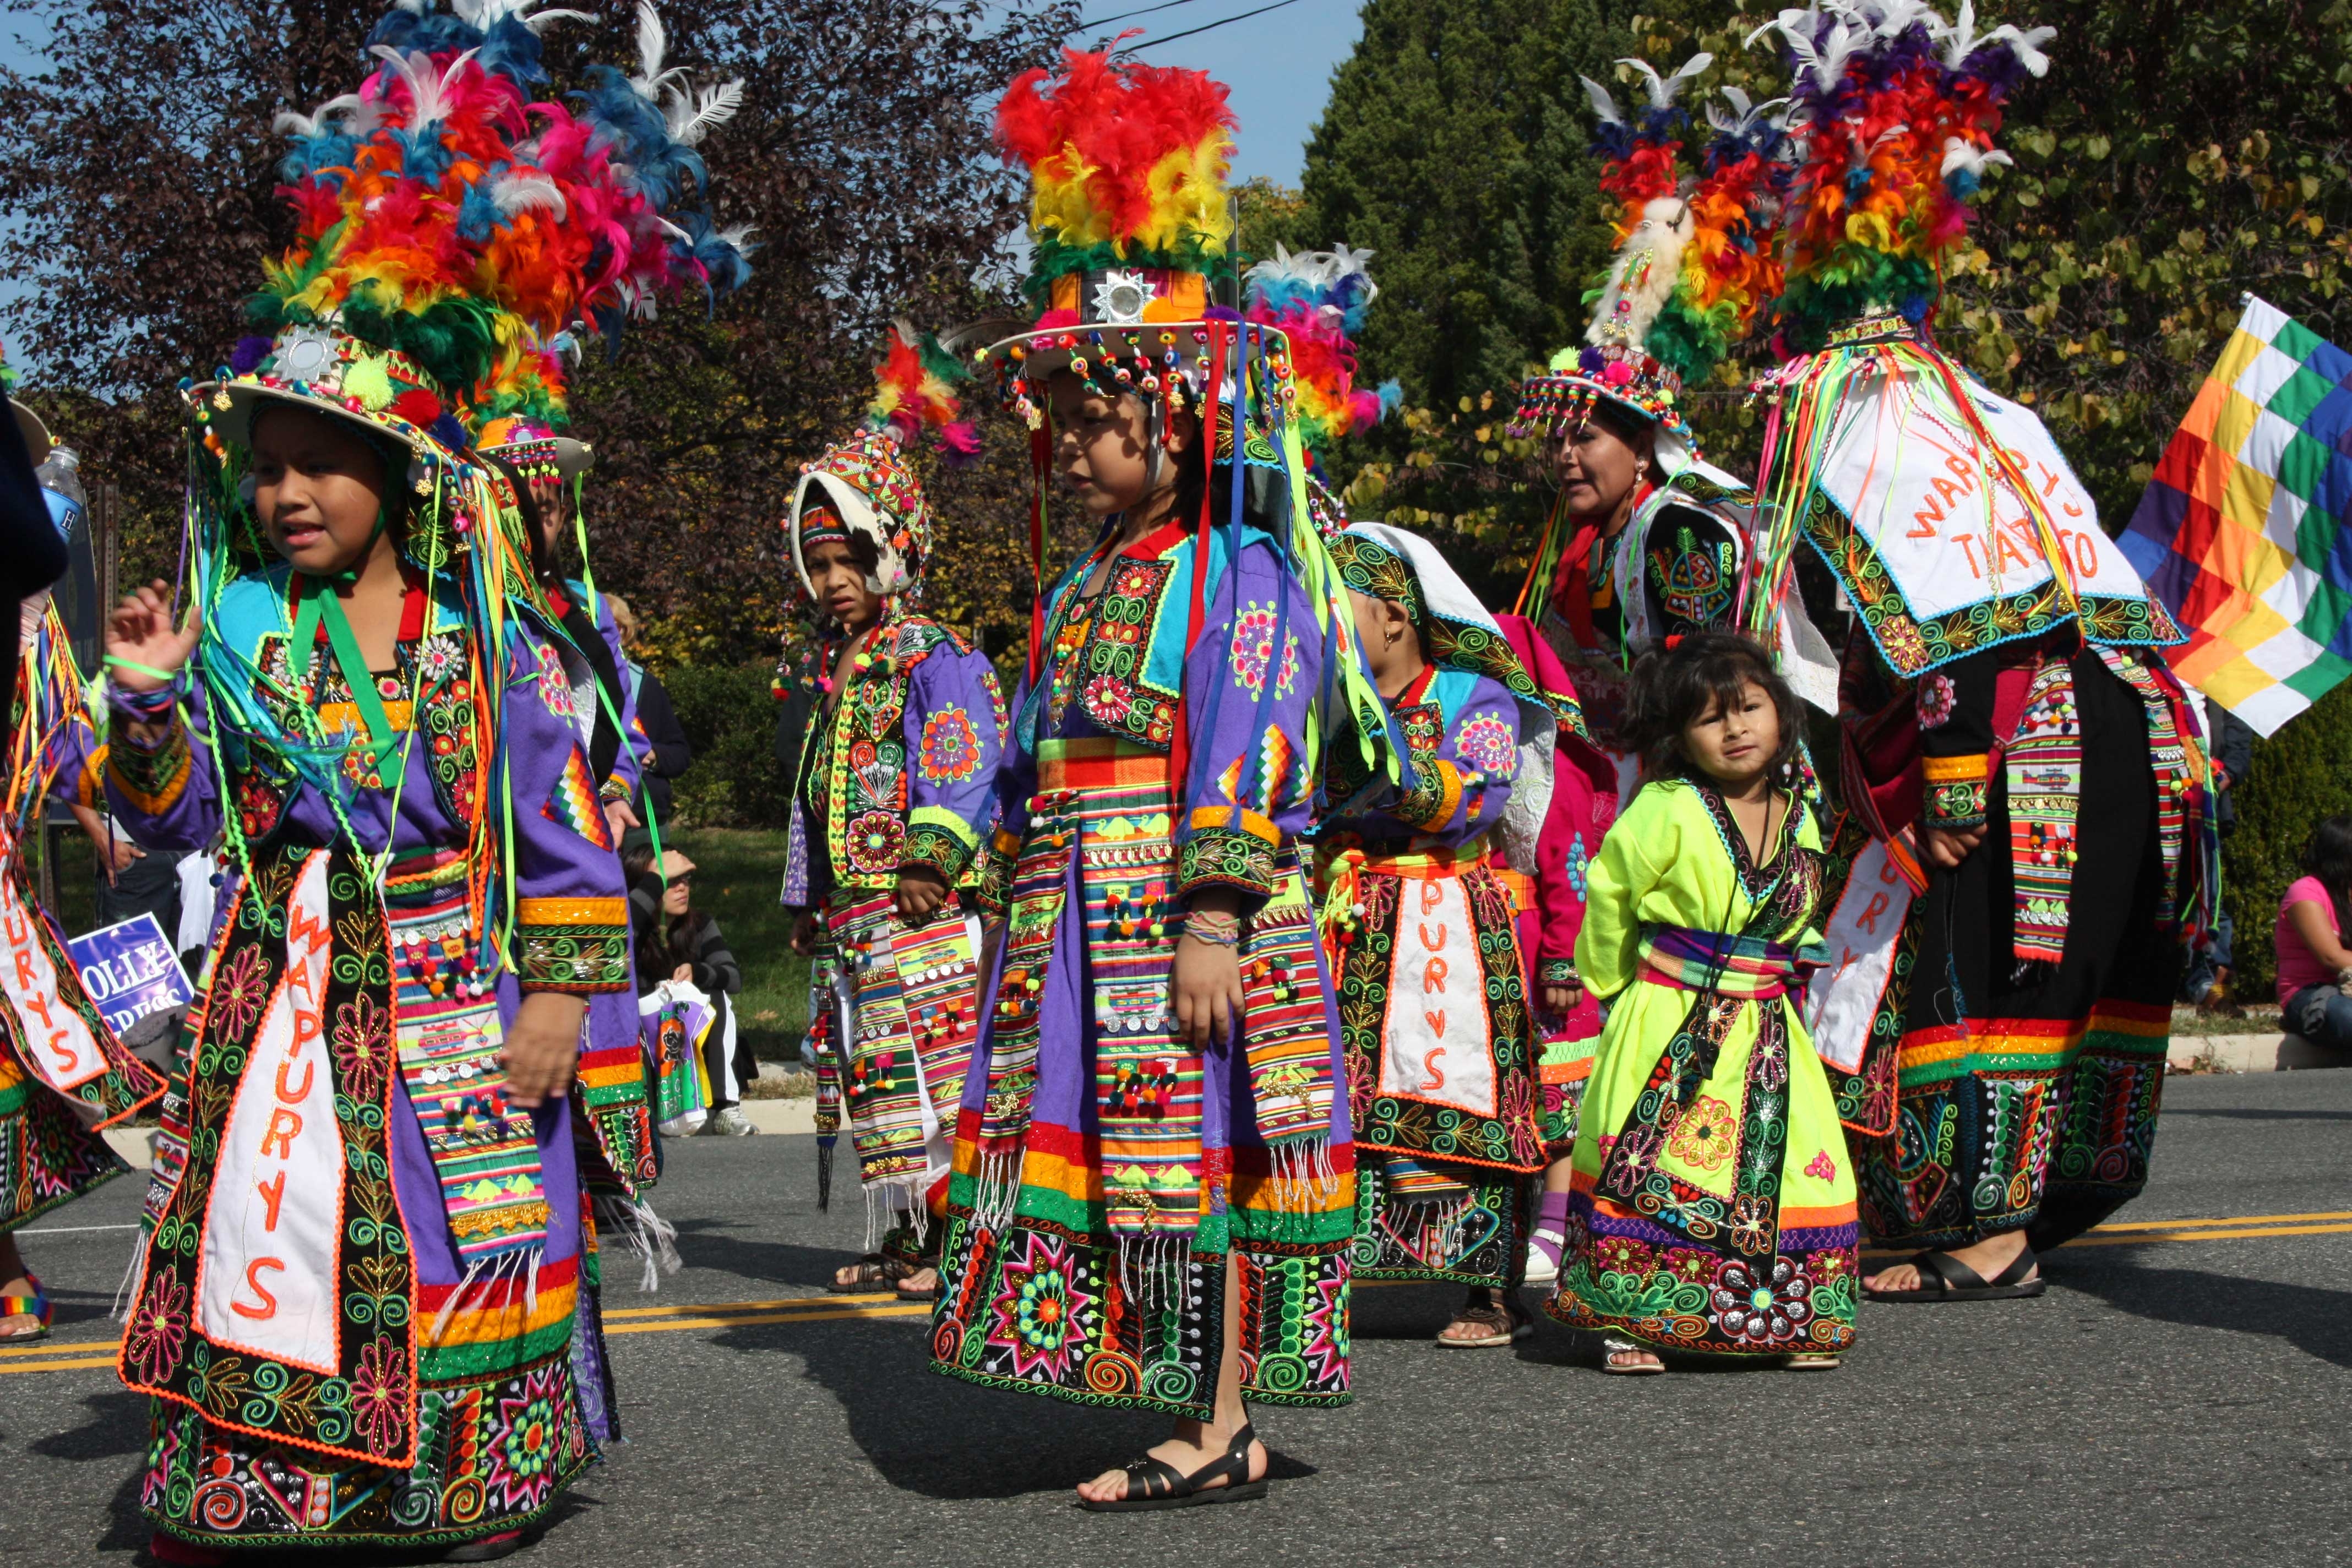 Bolivian Dancers in colorful native costumes grace the parade with color, dance, and toe tapping musi